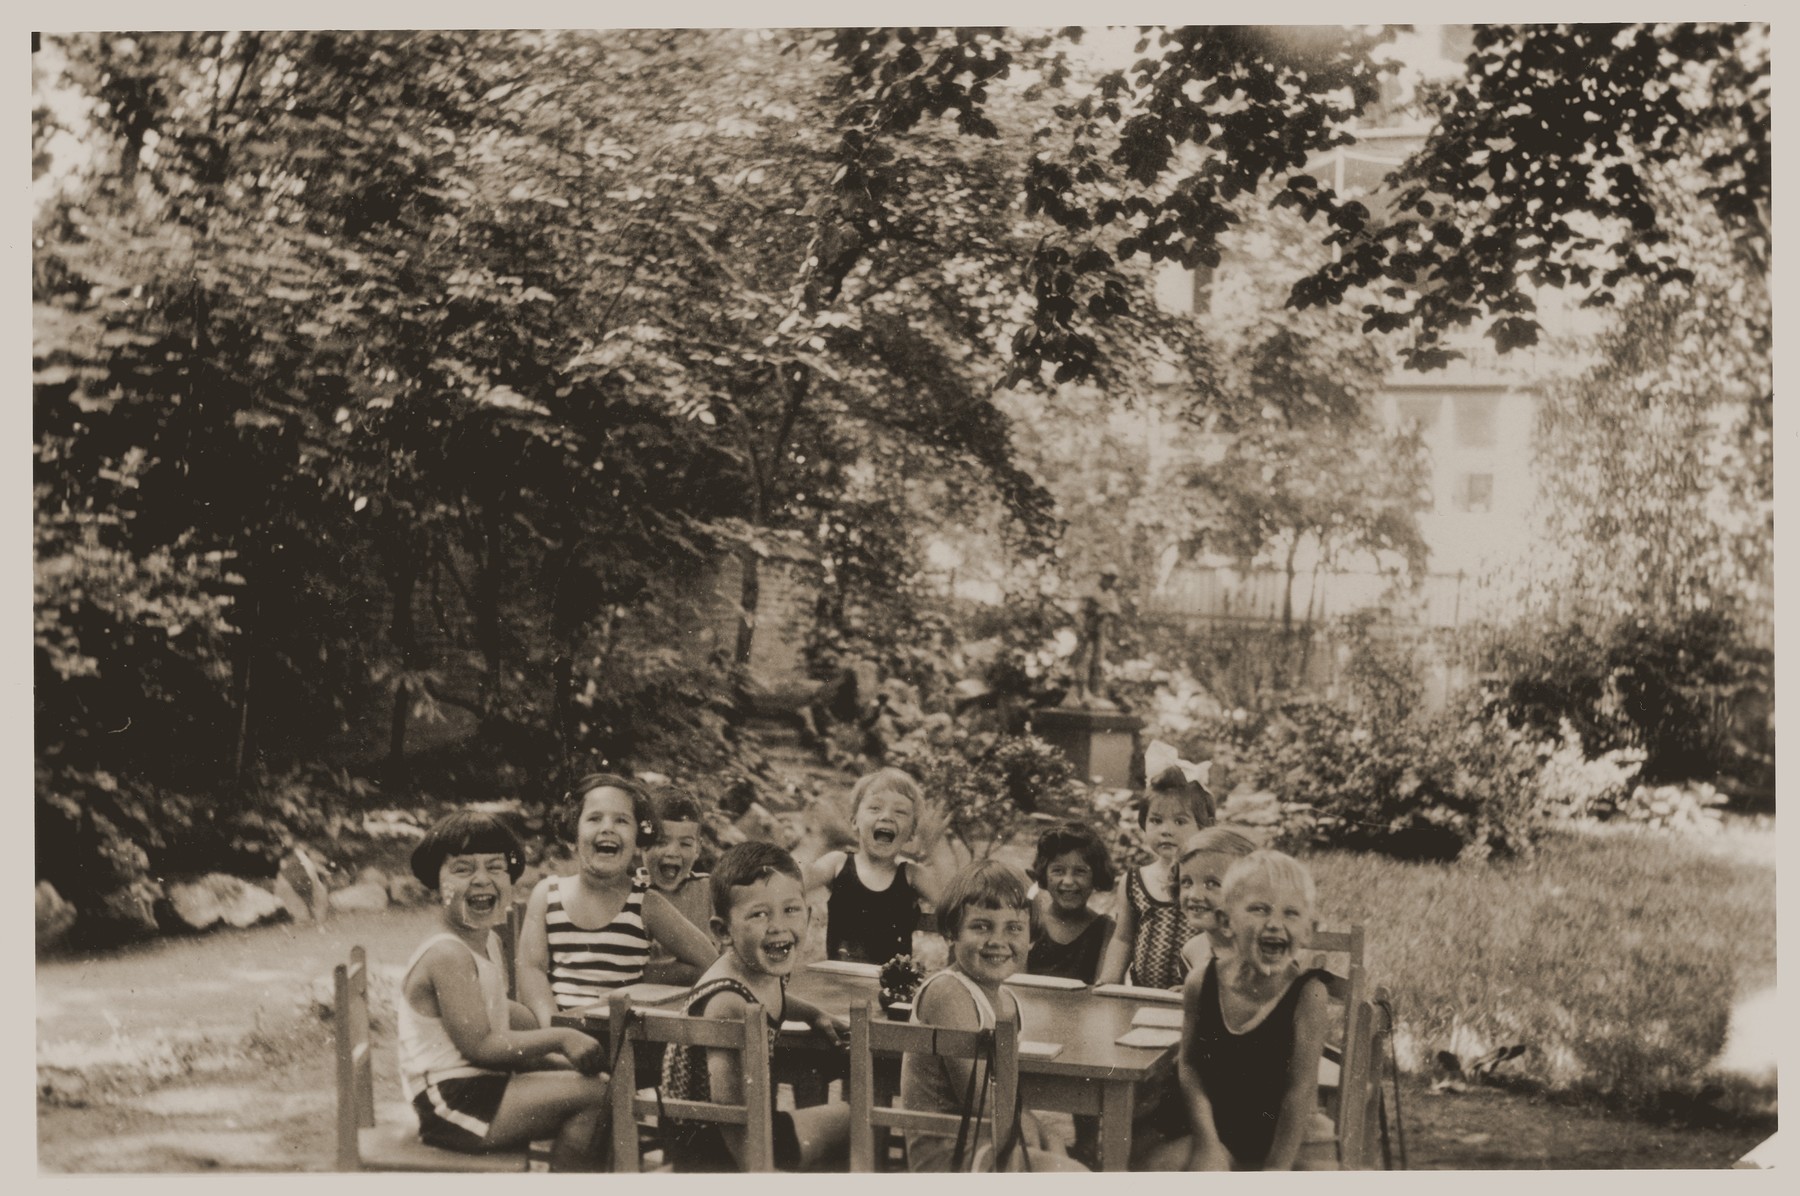 Lore Gotthelf (second from the left) with her classmates at nursery school.

Also pictured is Gunther Alfred Hess (seated in front of the table, center).